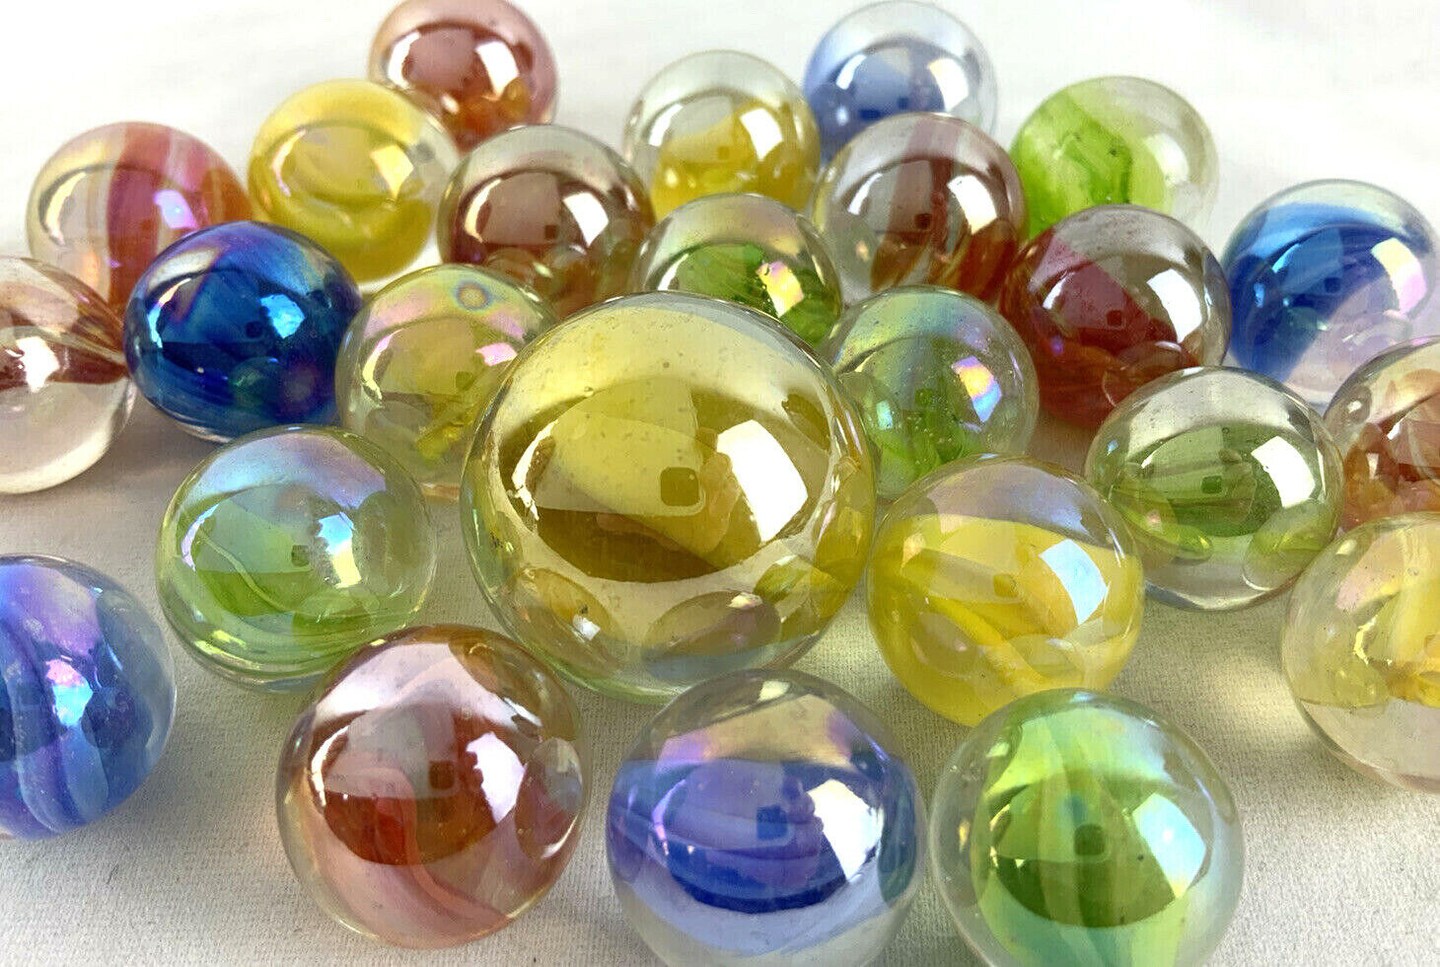 25 Glass Marbles RAINBOW Cat Eye Red/Yellow/Blue/Green Cats Eyes Pack Shooter